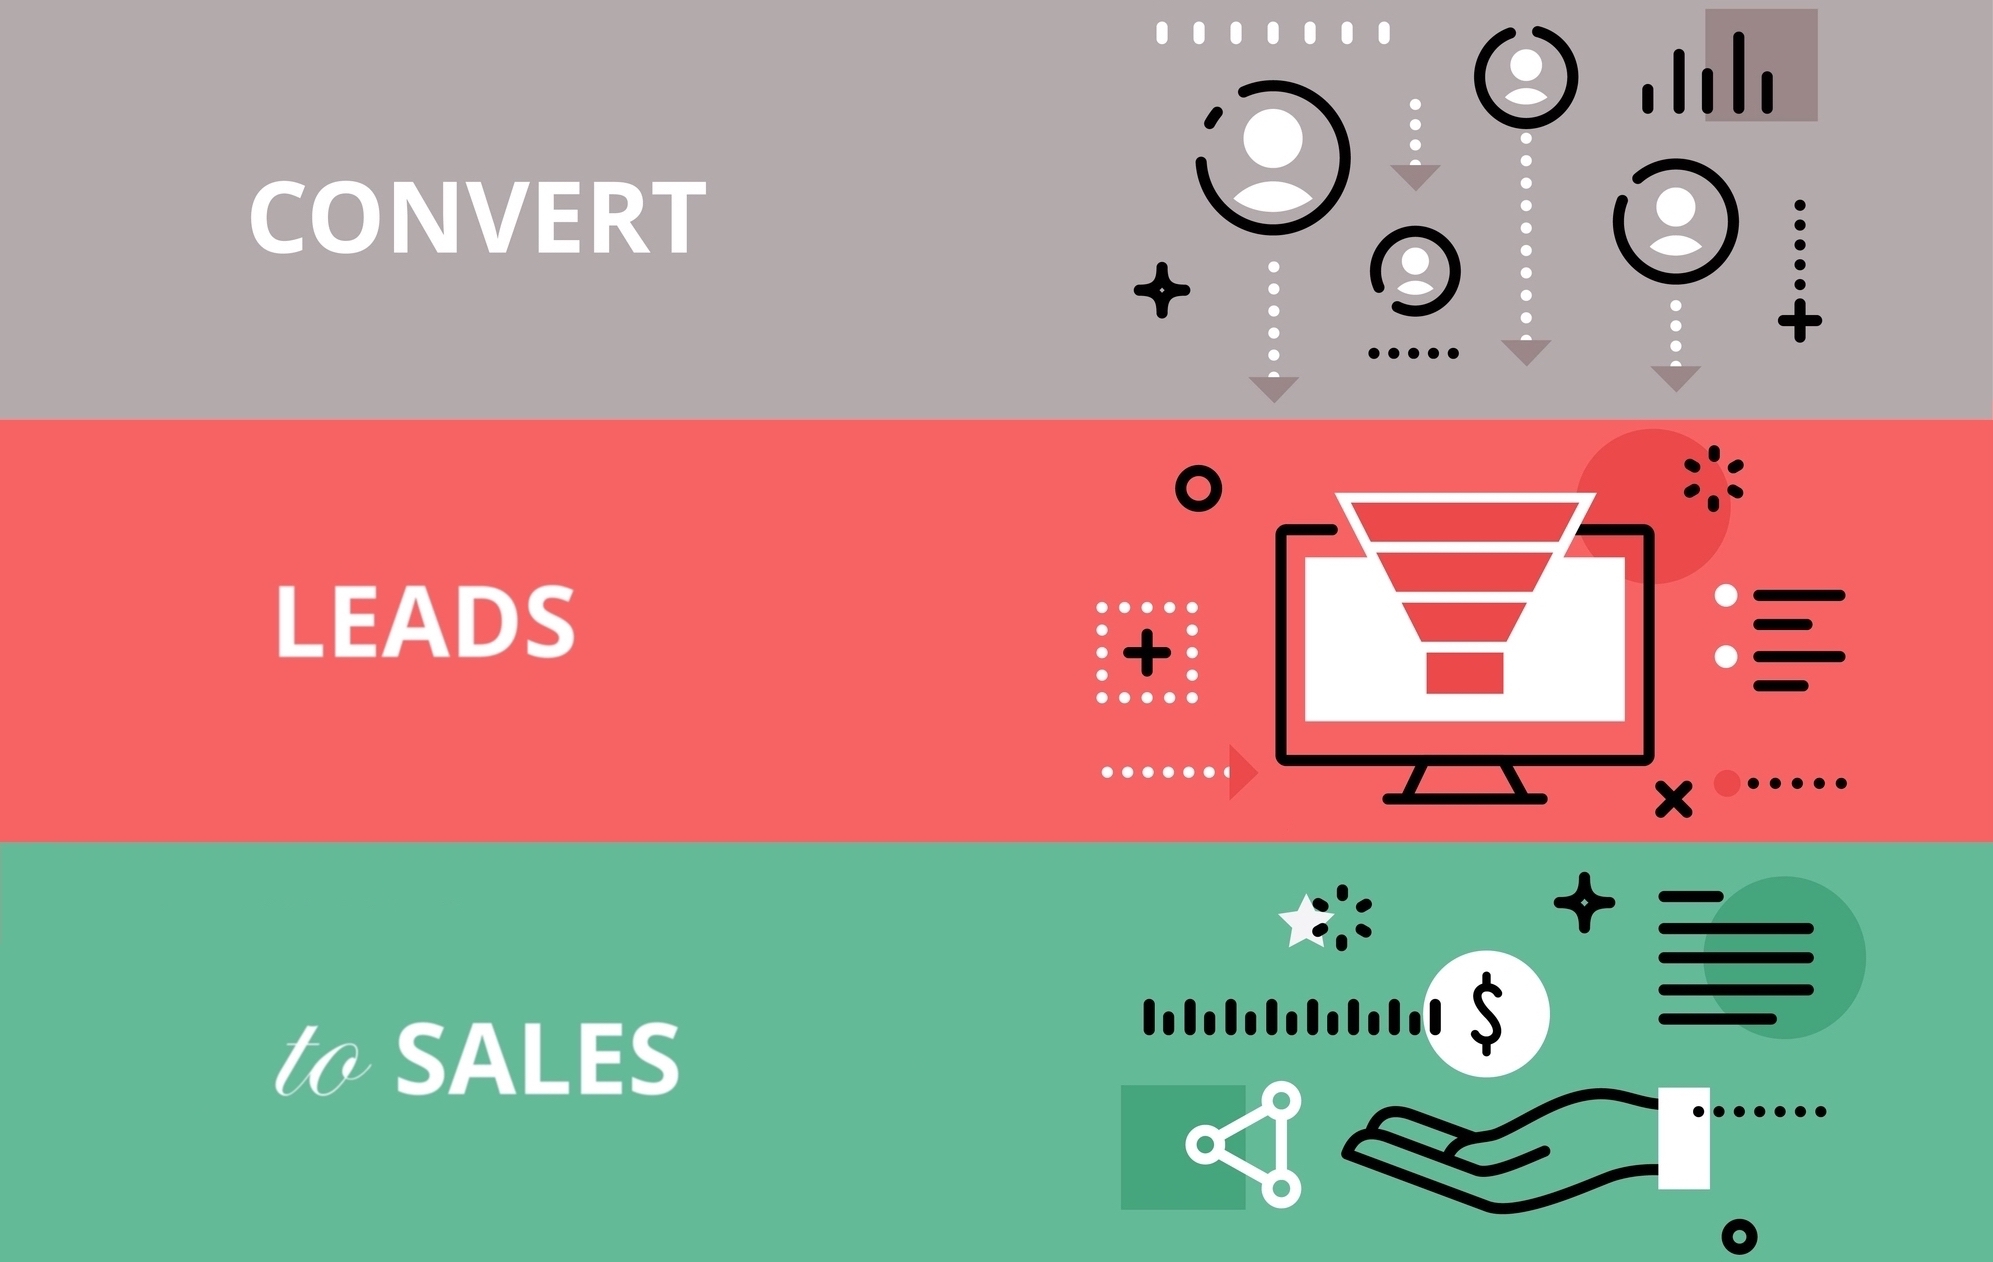 Top Marketing Books That Convert Leads